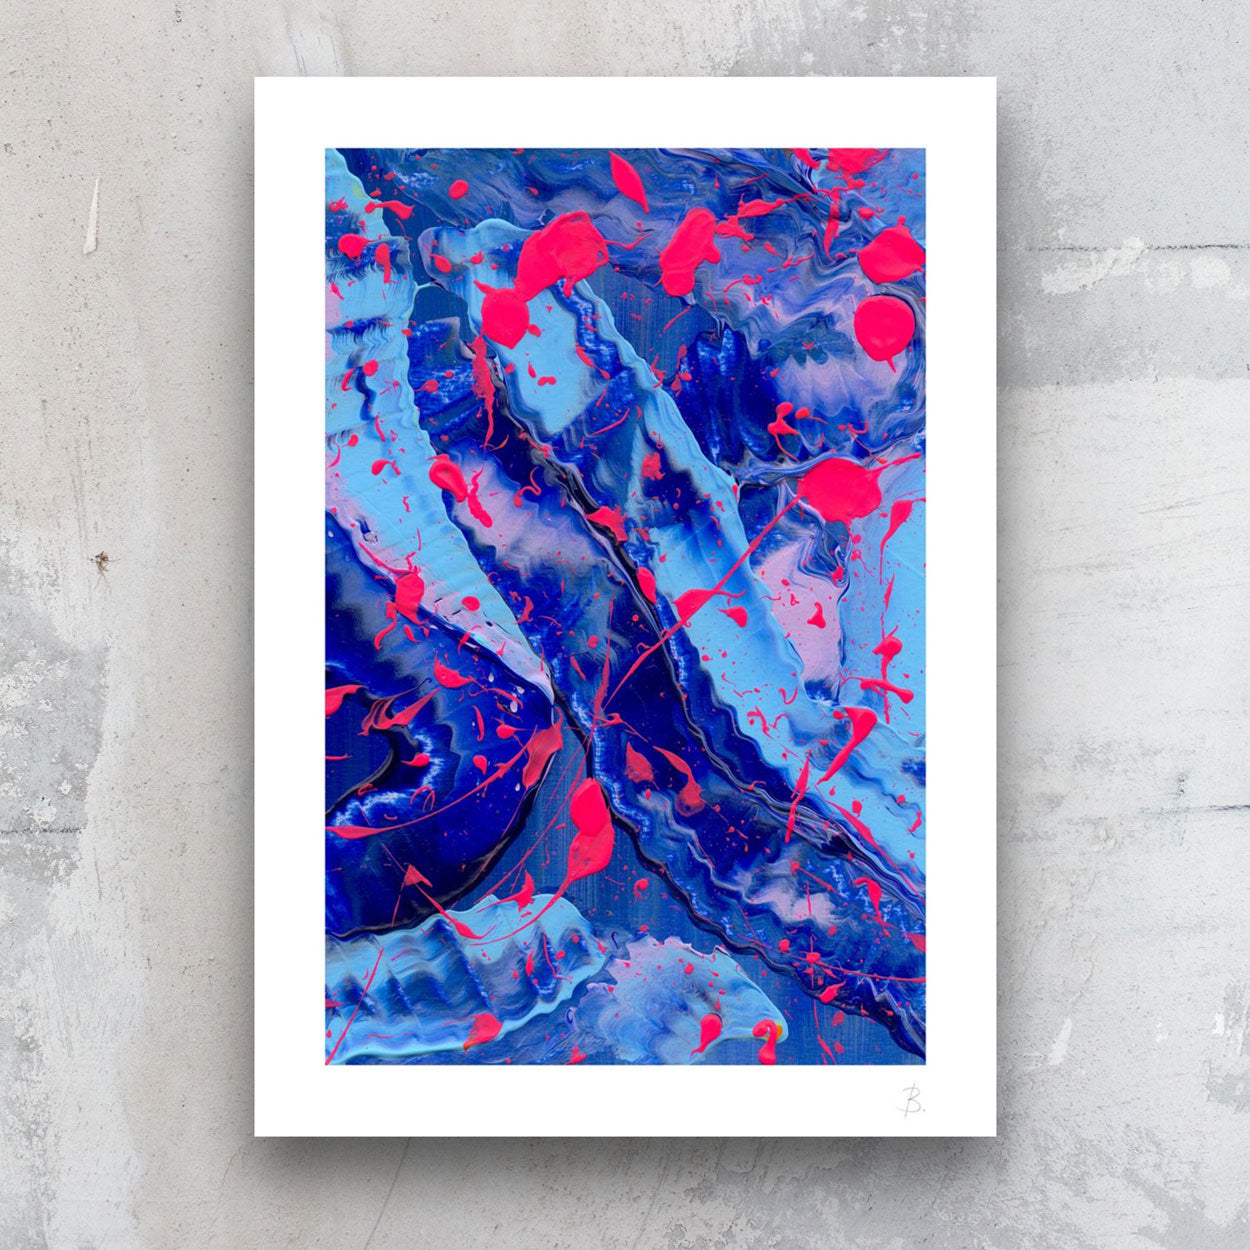 Blue III Art Print on paper in blues and neon pinks with white border,against stone wall. Bridget Bradley Abstract Prints